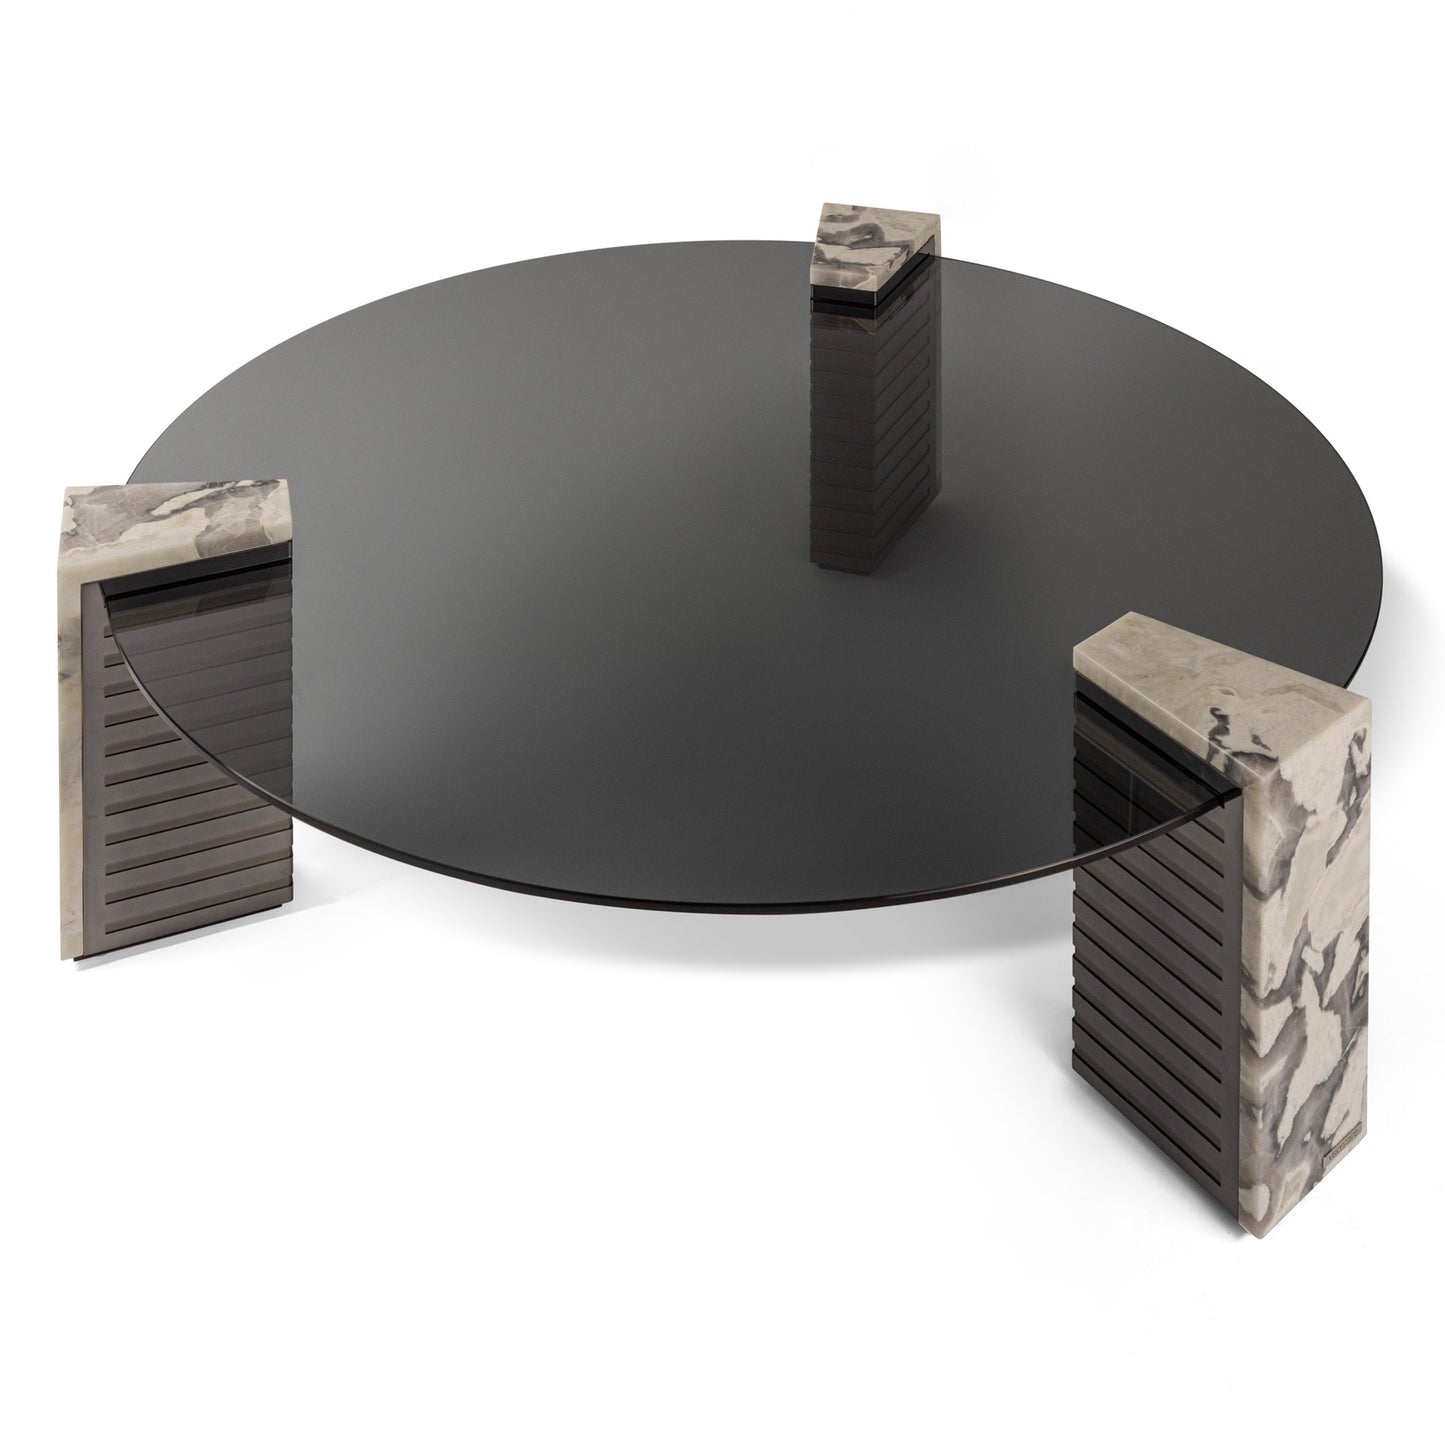 Visionnaire Admeto Coffee Table